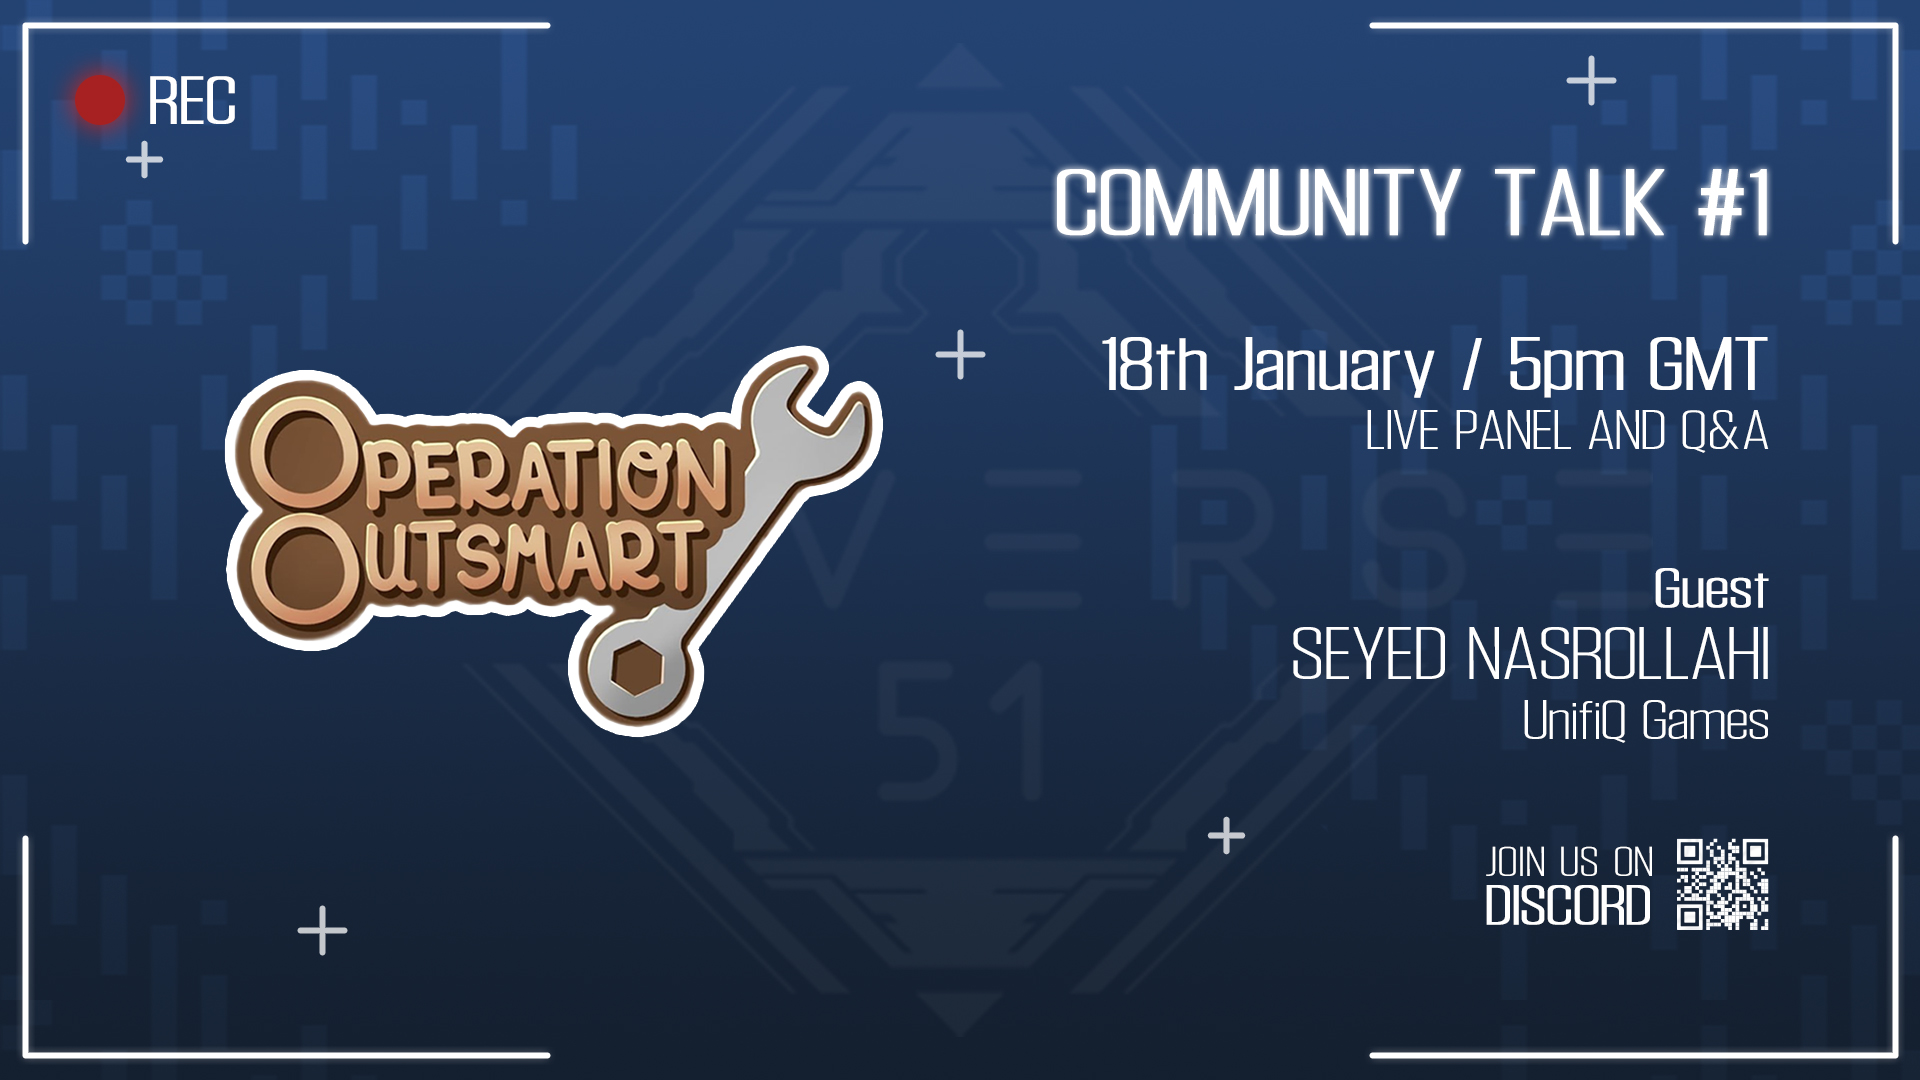 ↑First Community Talk with Seyed Nasrollahi from UnifiQ Games↑